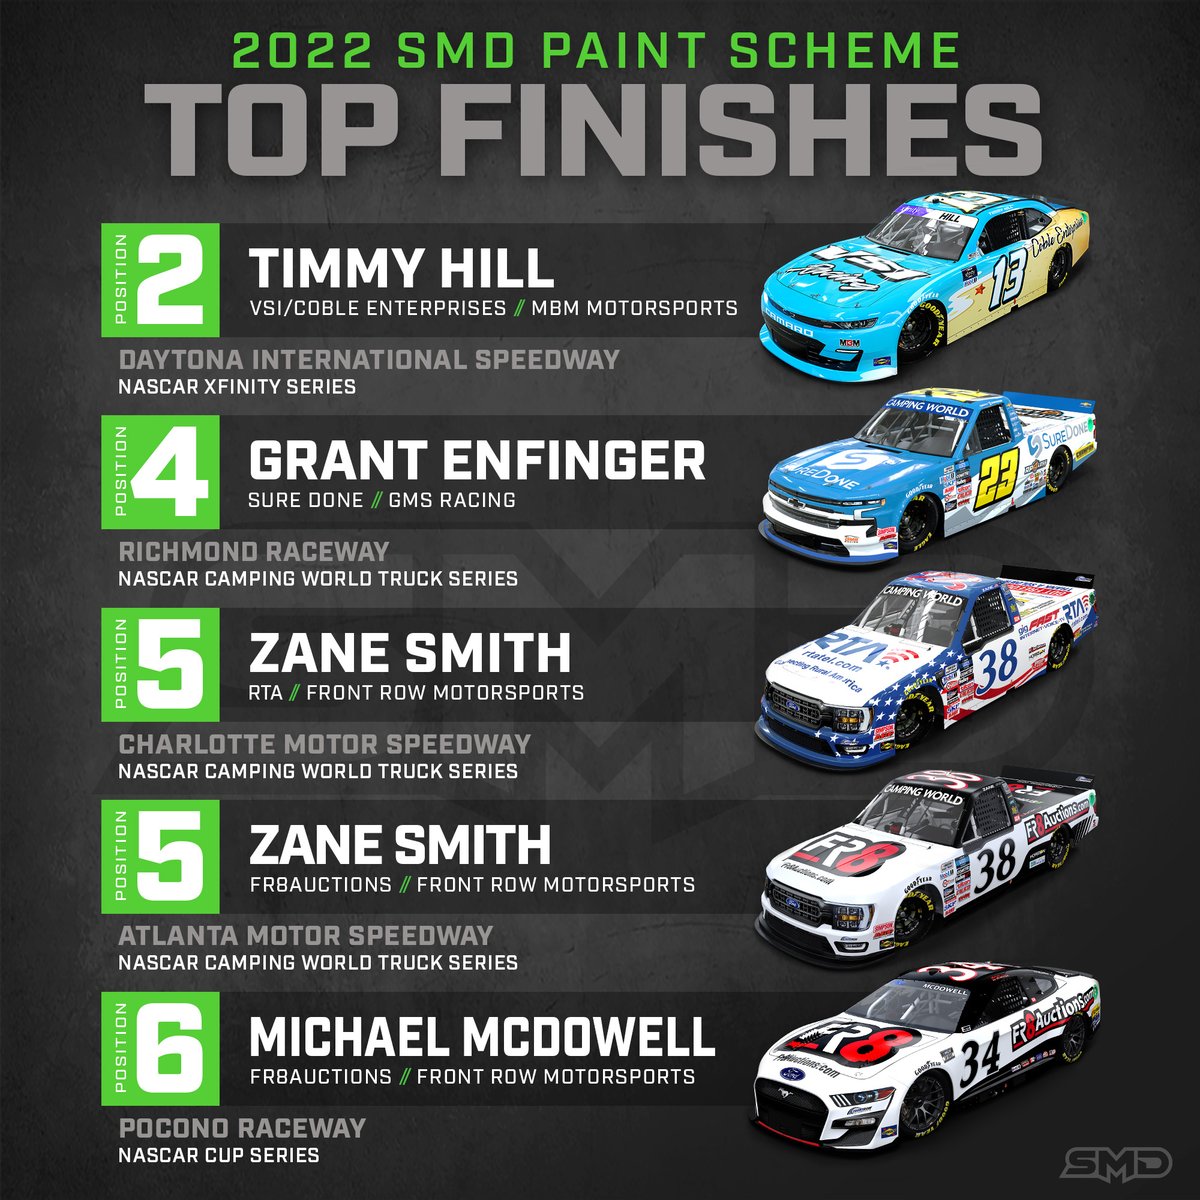 With the #NASCAR off-season in full swing, we take a look back to the 5 best finishes for drivers running SMD paint schemes. 🏁

P2 - @TimmyHillRacer 
P4 - @GrantEnfinger  
P5 - @zanesmith77 
P5 - @zanesmith77 
P6 - @Mc_Driver

#NASCARtrucks #NASCARXfinity #PaintSchemeDesign